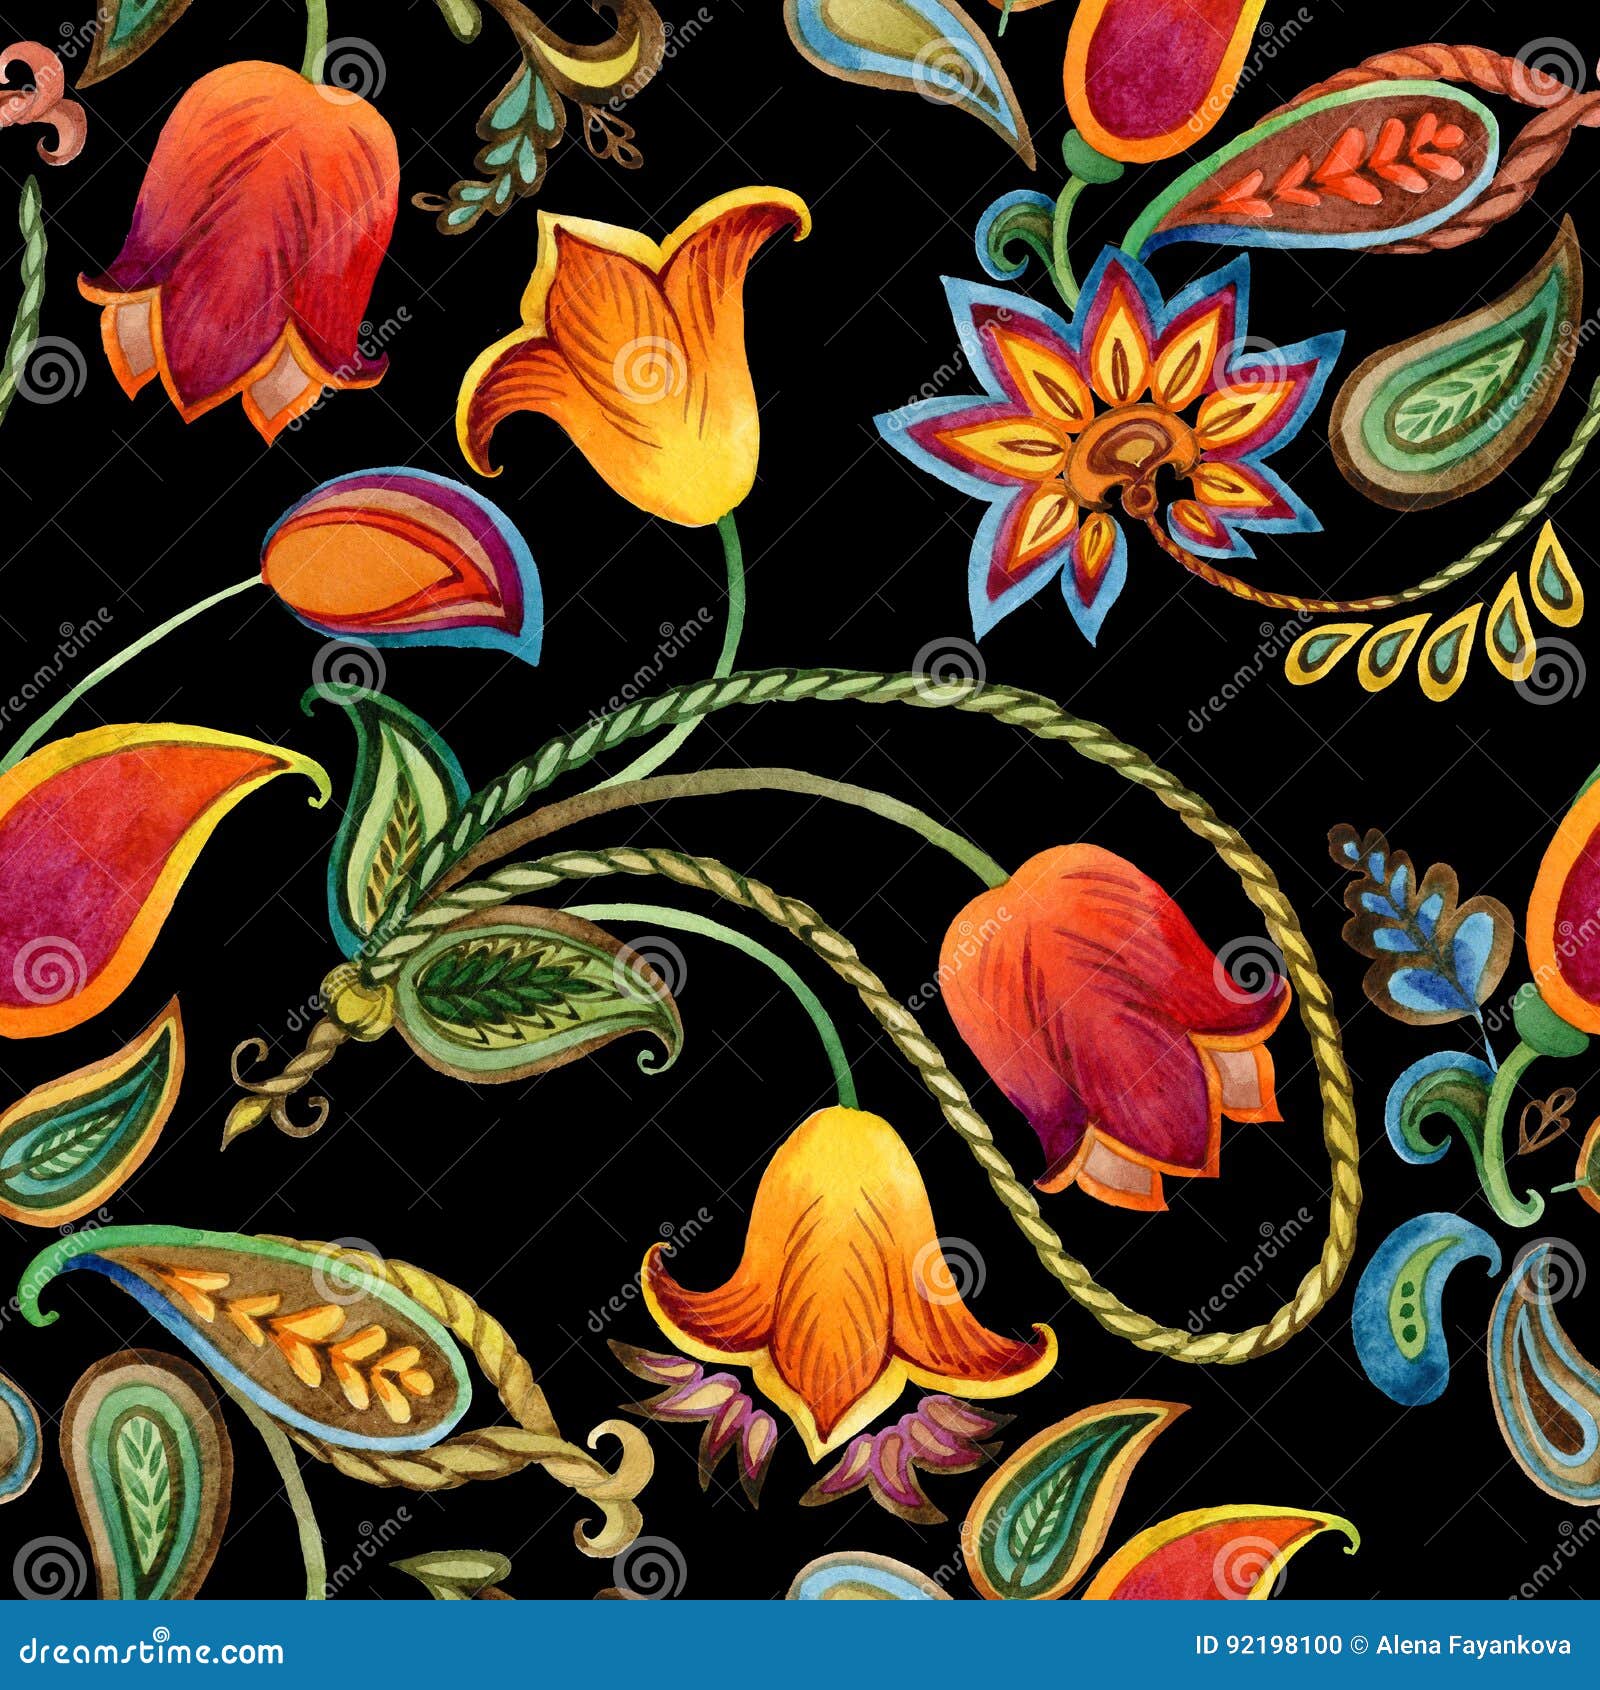 watercolor flower paisley pattern. seamless indian motif background.